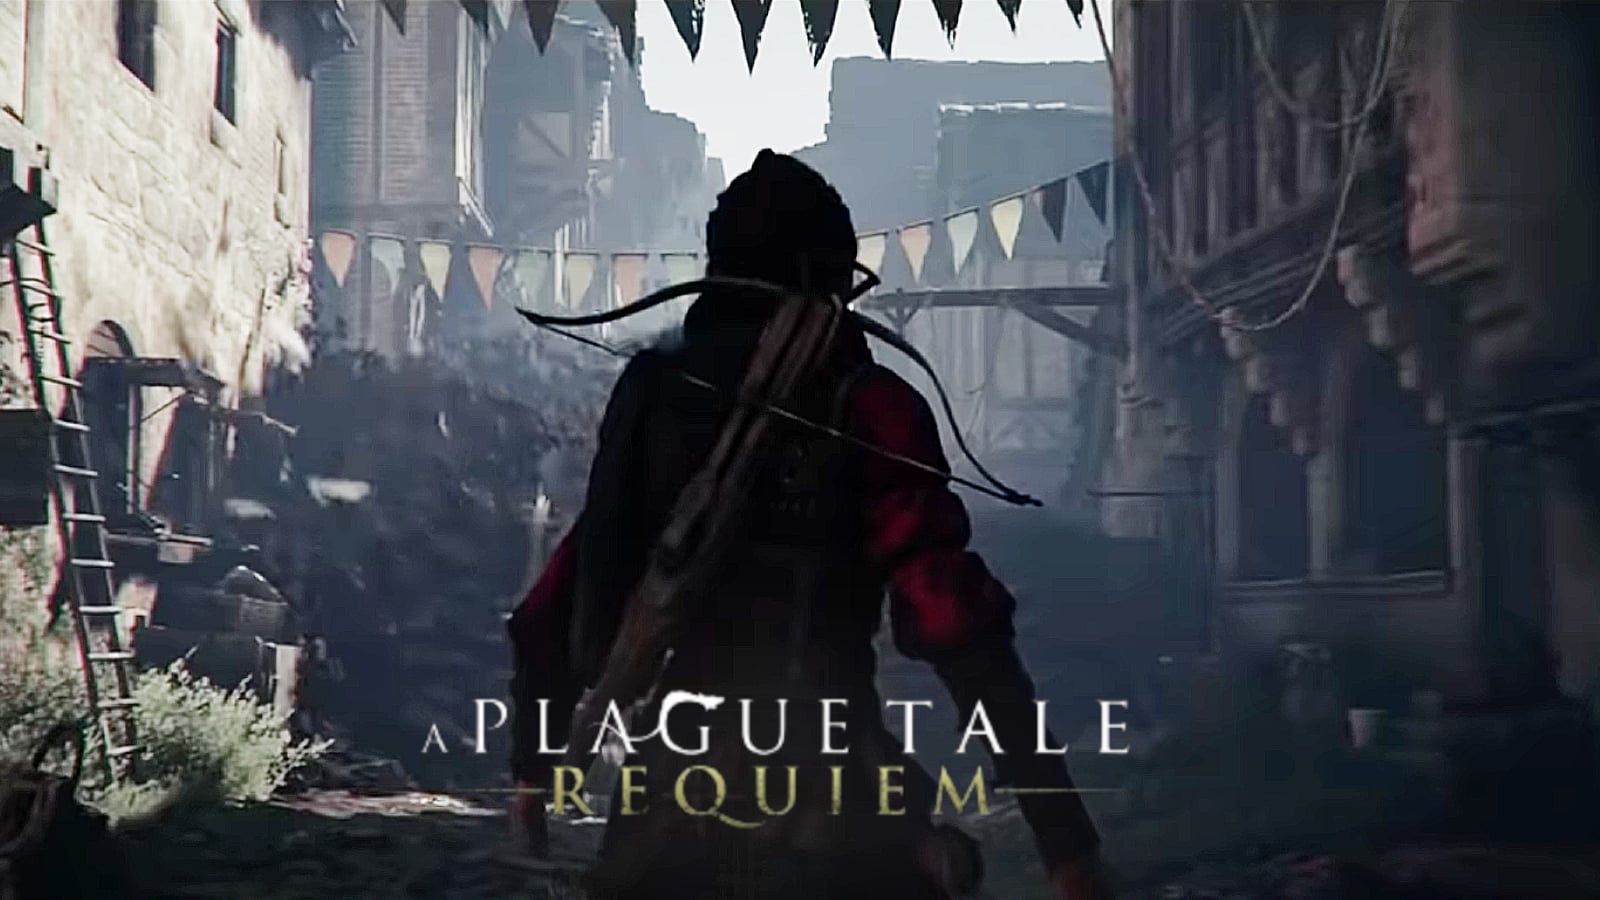 5 tips and tricks to know before playing A Plague Tale Requiem